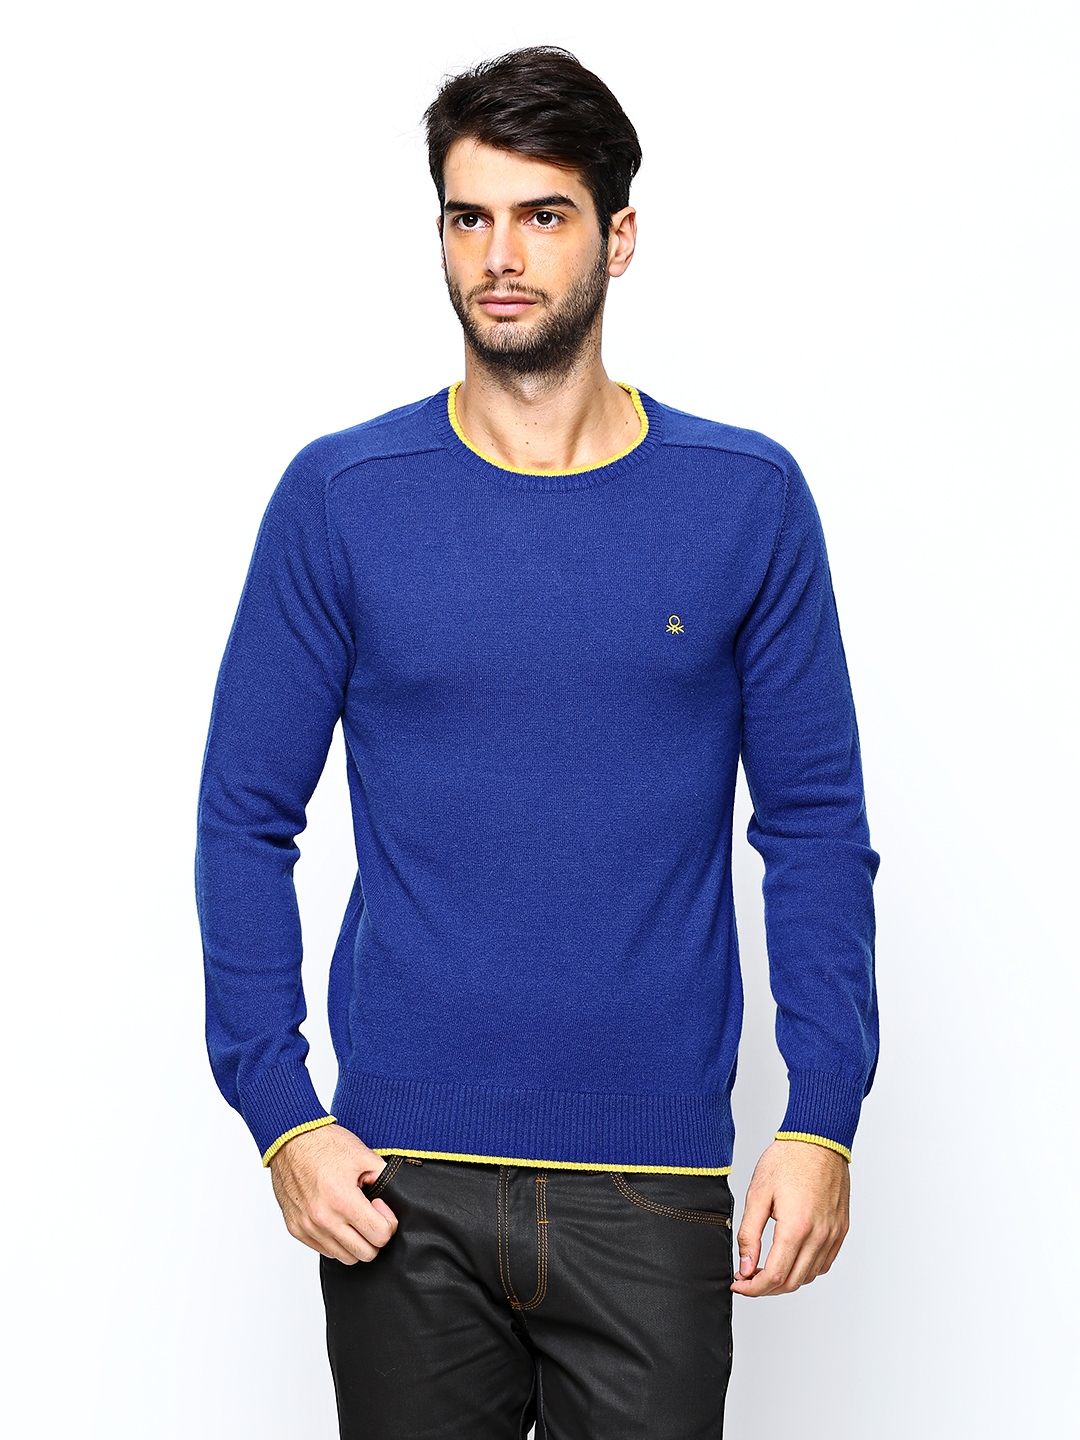 Buy United Colors Of Benetton Men Royal Blue Lambswool Blend Sweater ...